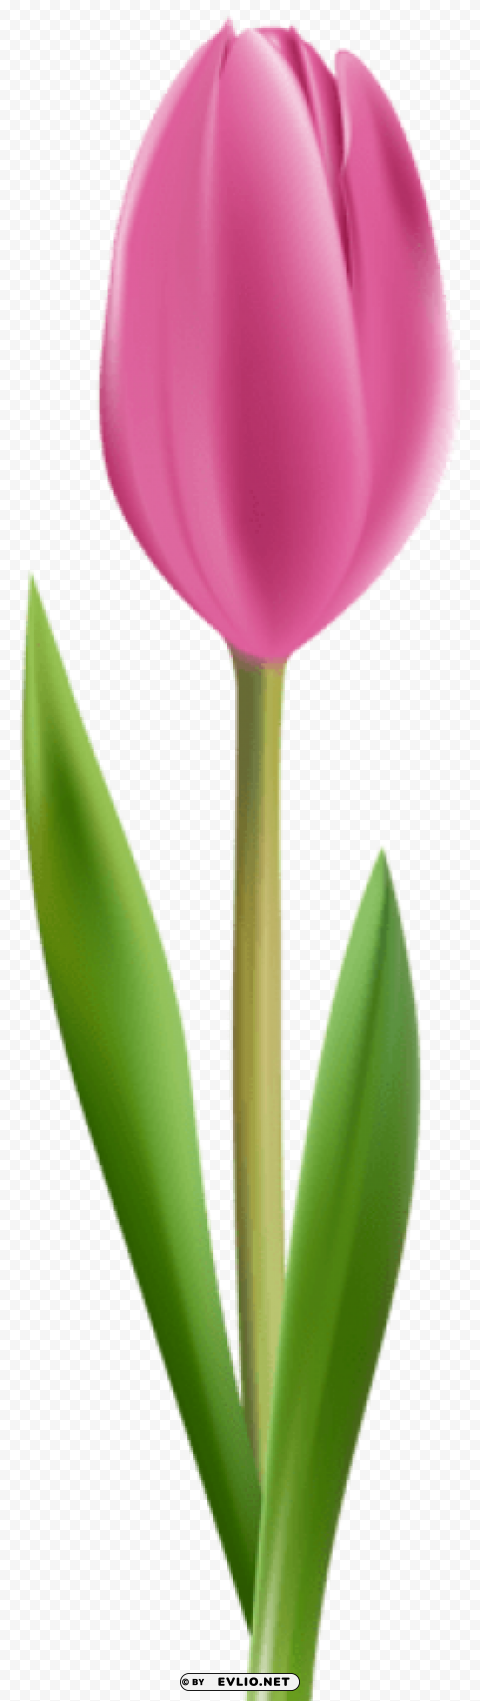 PNG image of pink tulip HighResolution Transparent PNG Isolation with a clear background - Image ID 6497aa4e